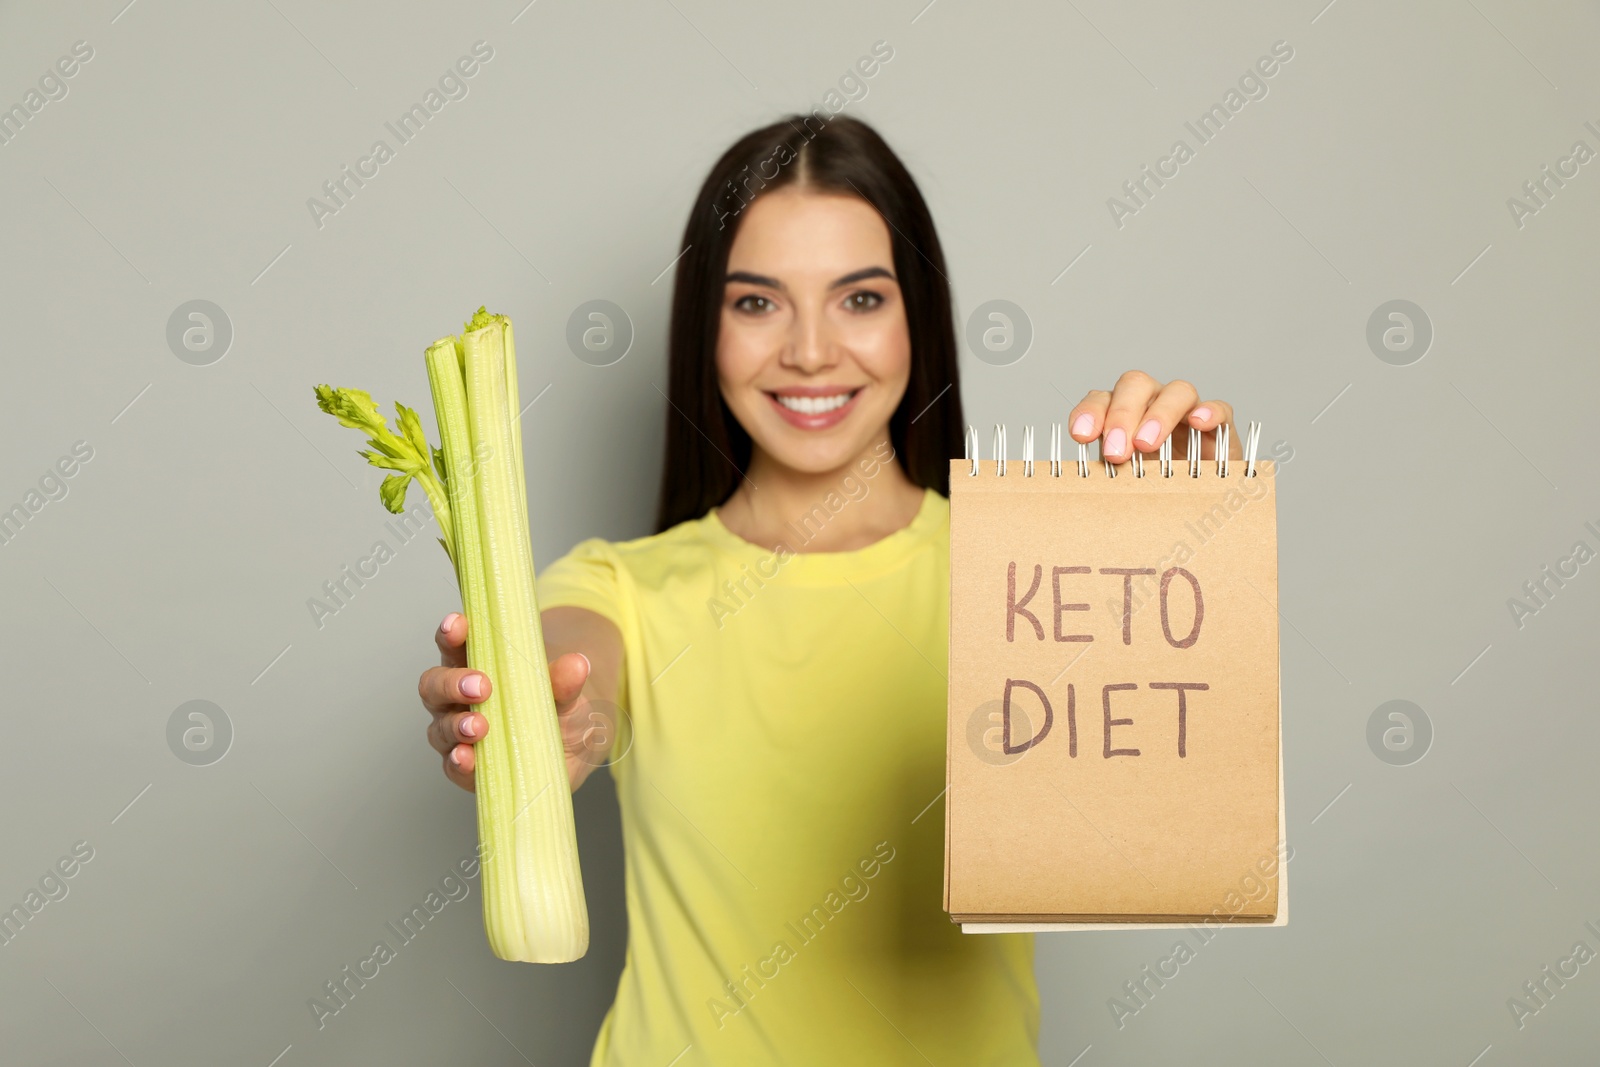 Photo of Happy woman holding celery and notebook with words Keto Diet against light grey background, focus on hands